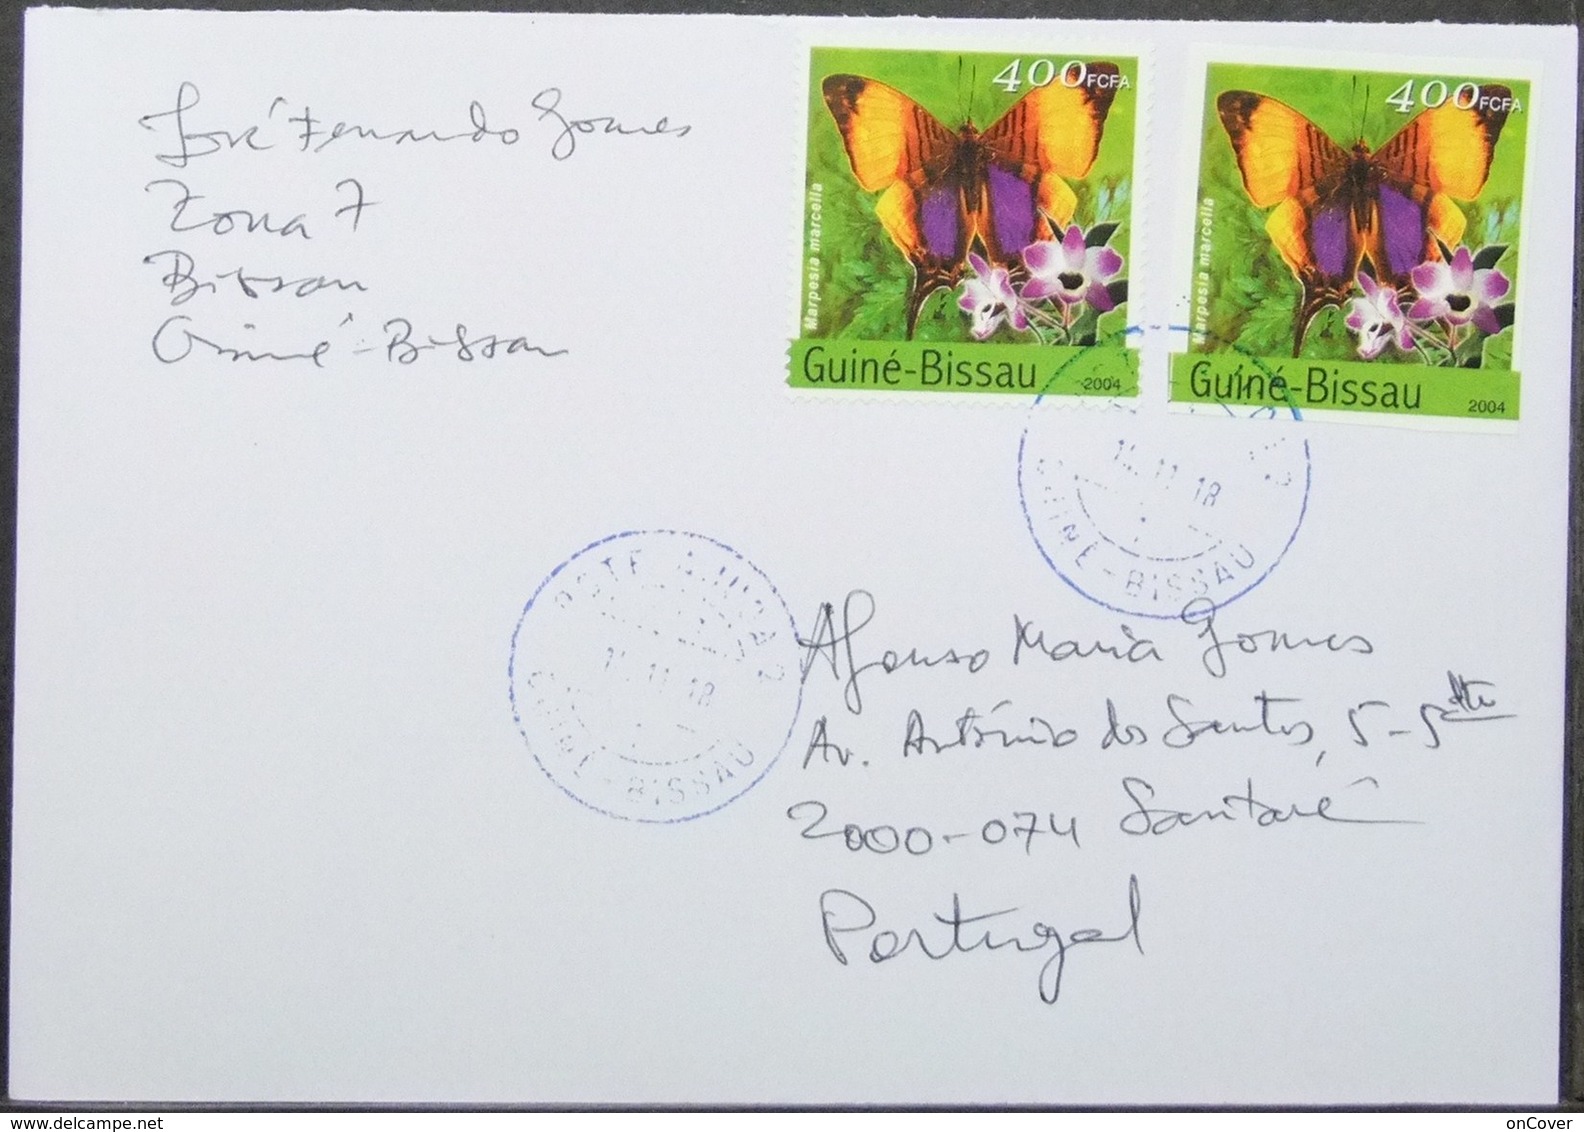 Guine-Bissau - Cover To Portugal Butterfly Perforate & Imperforate - Butterflies